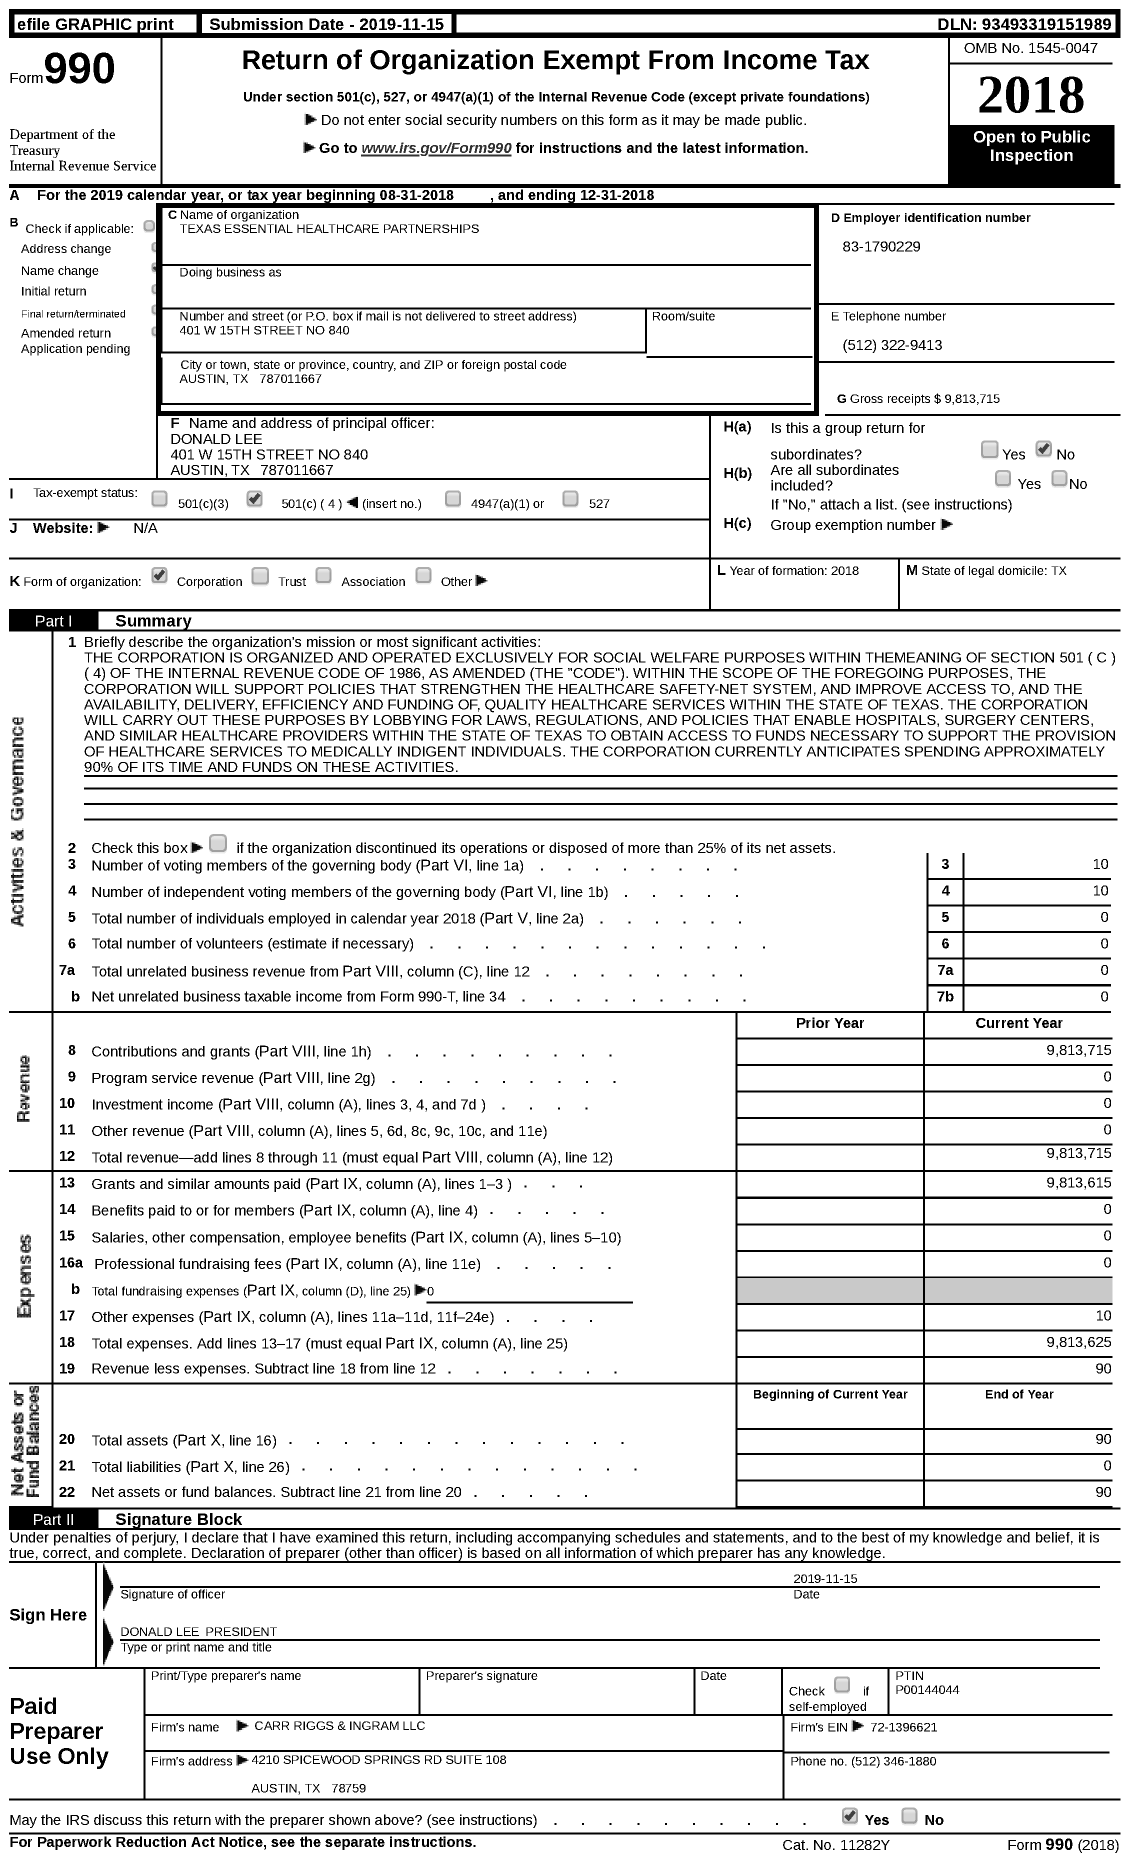 Image of first page of 2018 Form 990 for Texas Essential Healthcare Partnerships